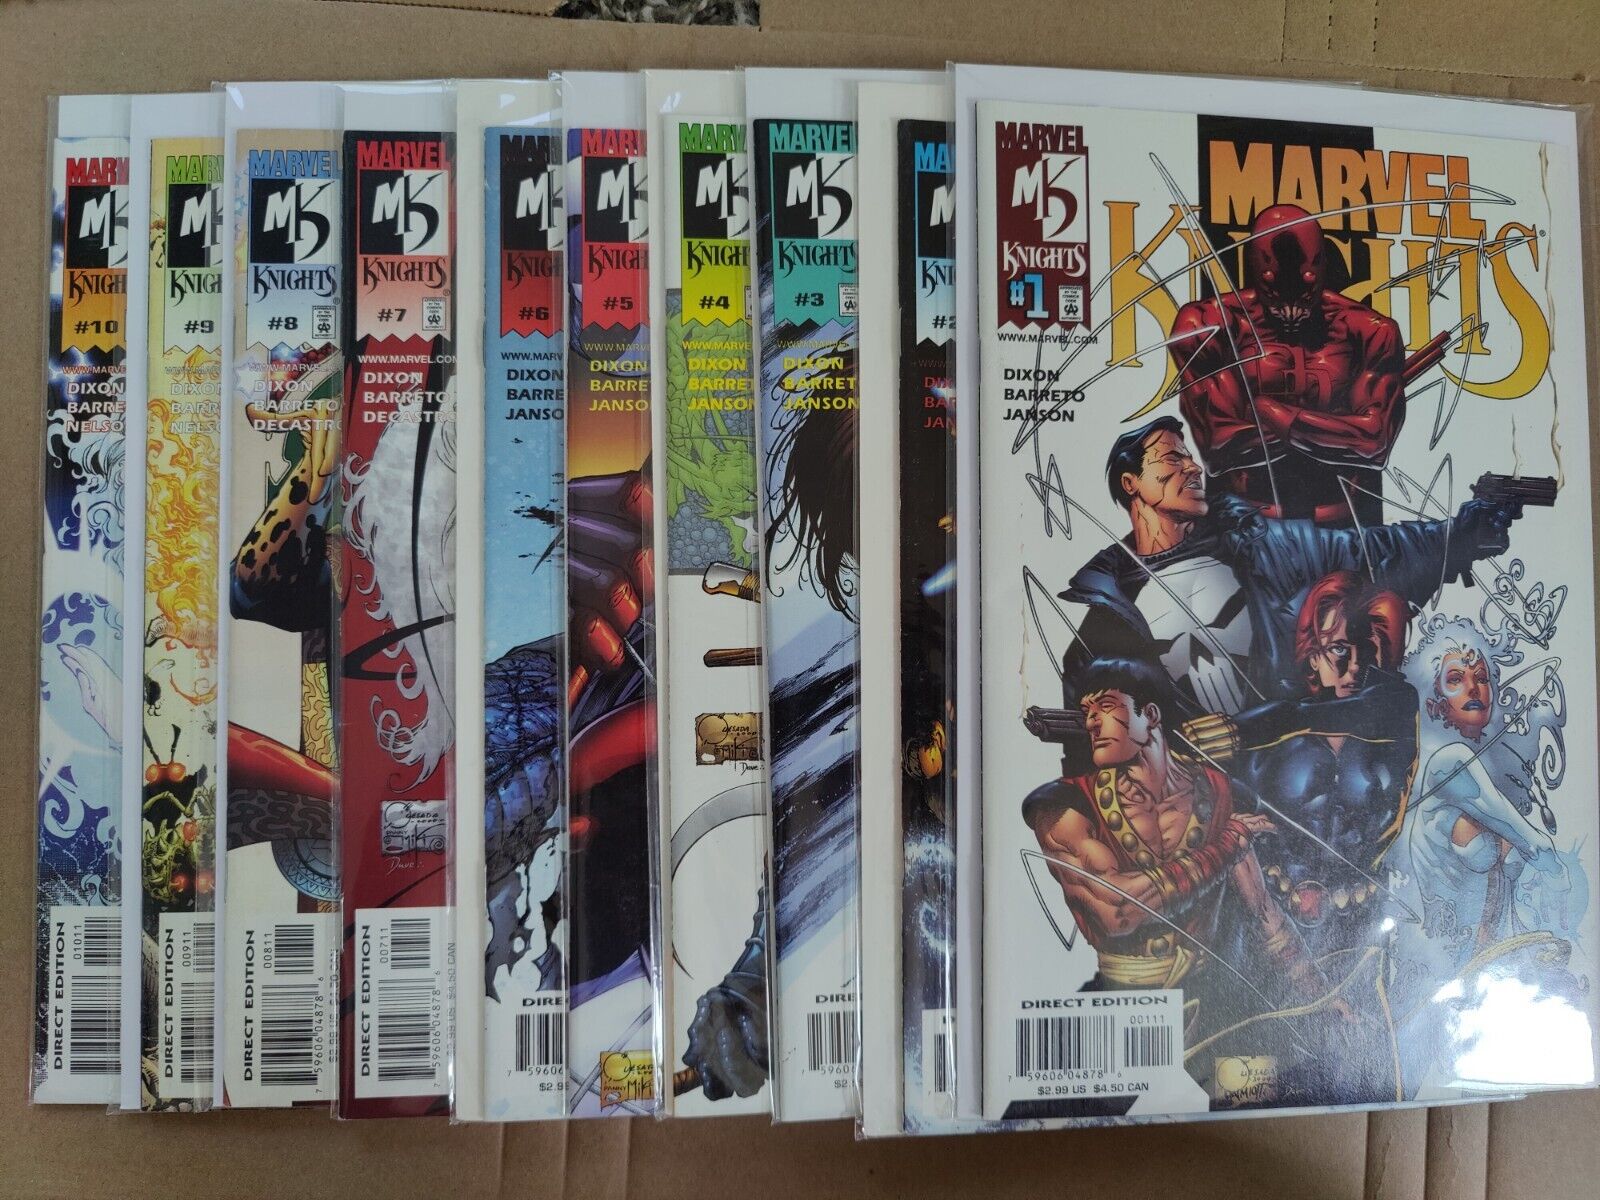 MARVEL KNIGHTS 1-10 QUESADA 1ST Appearance VF To NM Daredevil 2 3 4 5 6 7 8 9